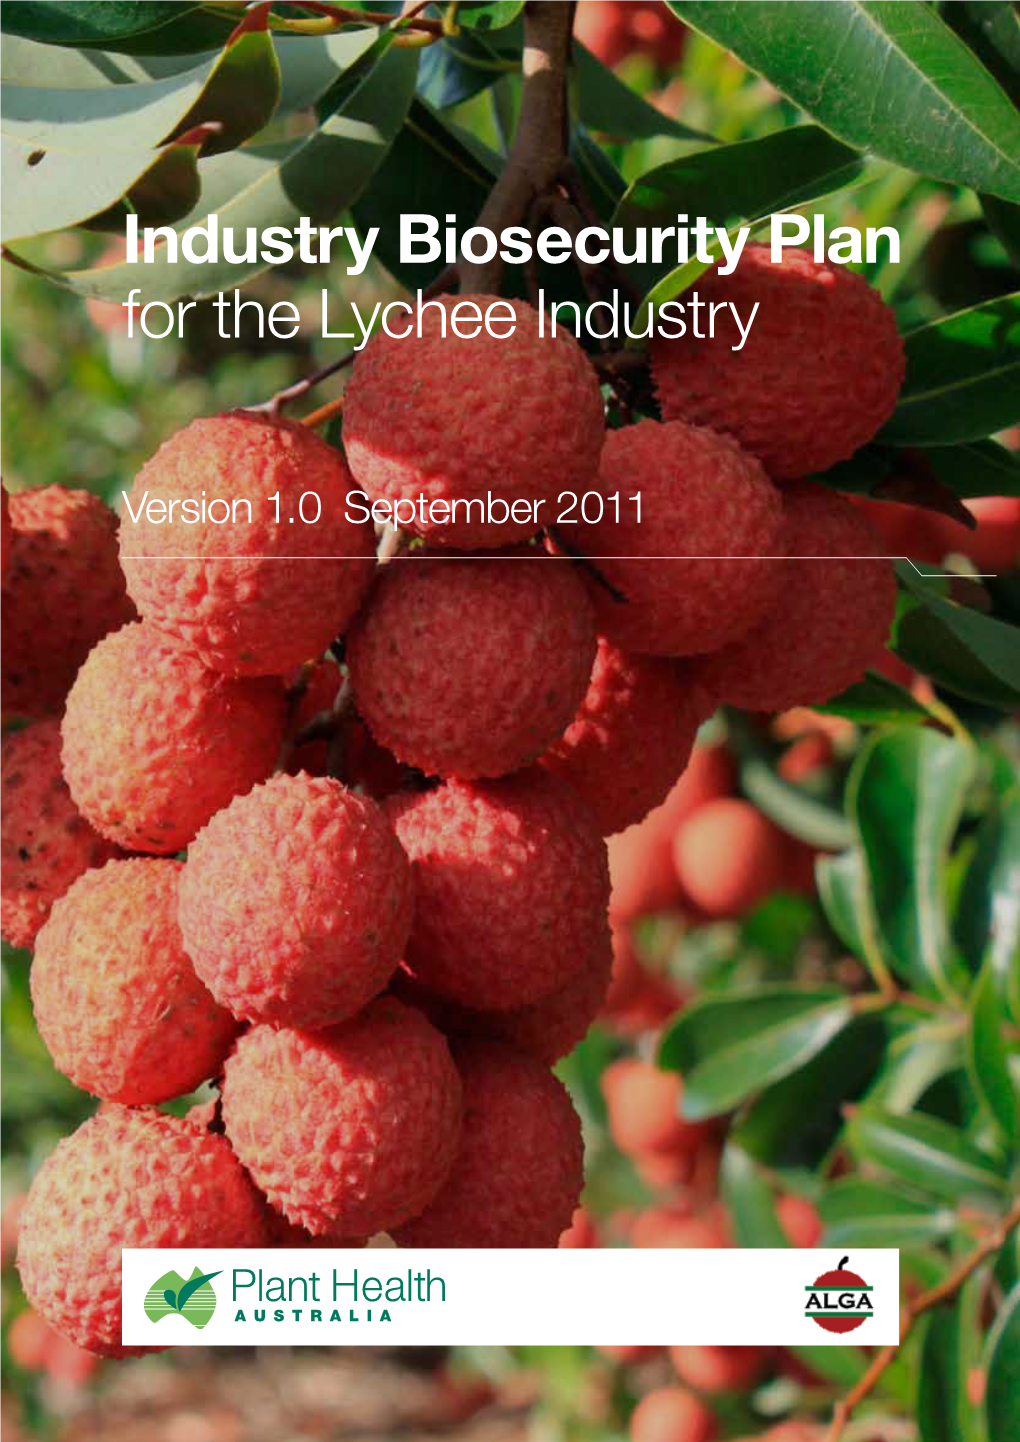 Industry Biosecurity Plan for the Lychee Industry